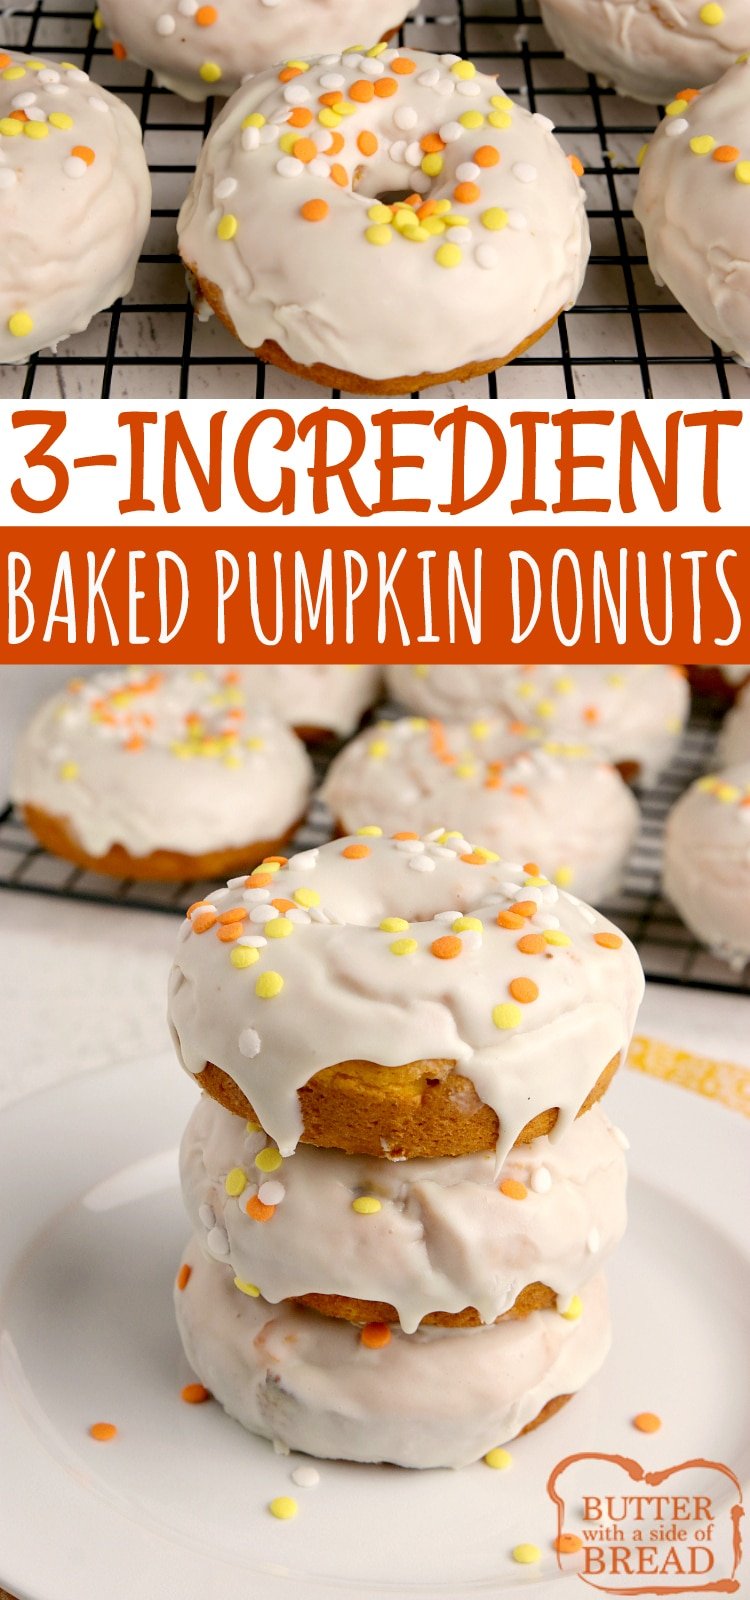 3-Ingredient Baked Pumpkin Donuts made with pumpkin, cake mix and frosting and completely baked in under 15 minutes! Easy cake mix donut recipe that yields soft, delicious doughnuts with tons of pumpkin flavor!